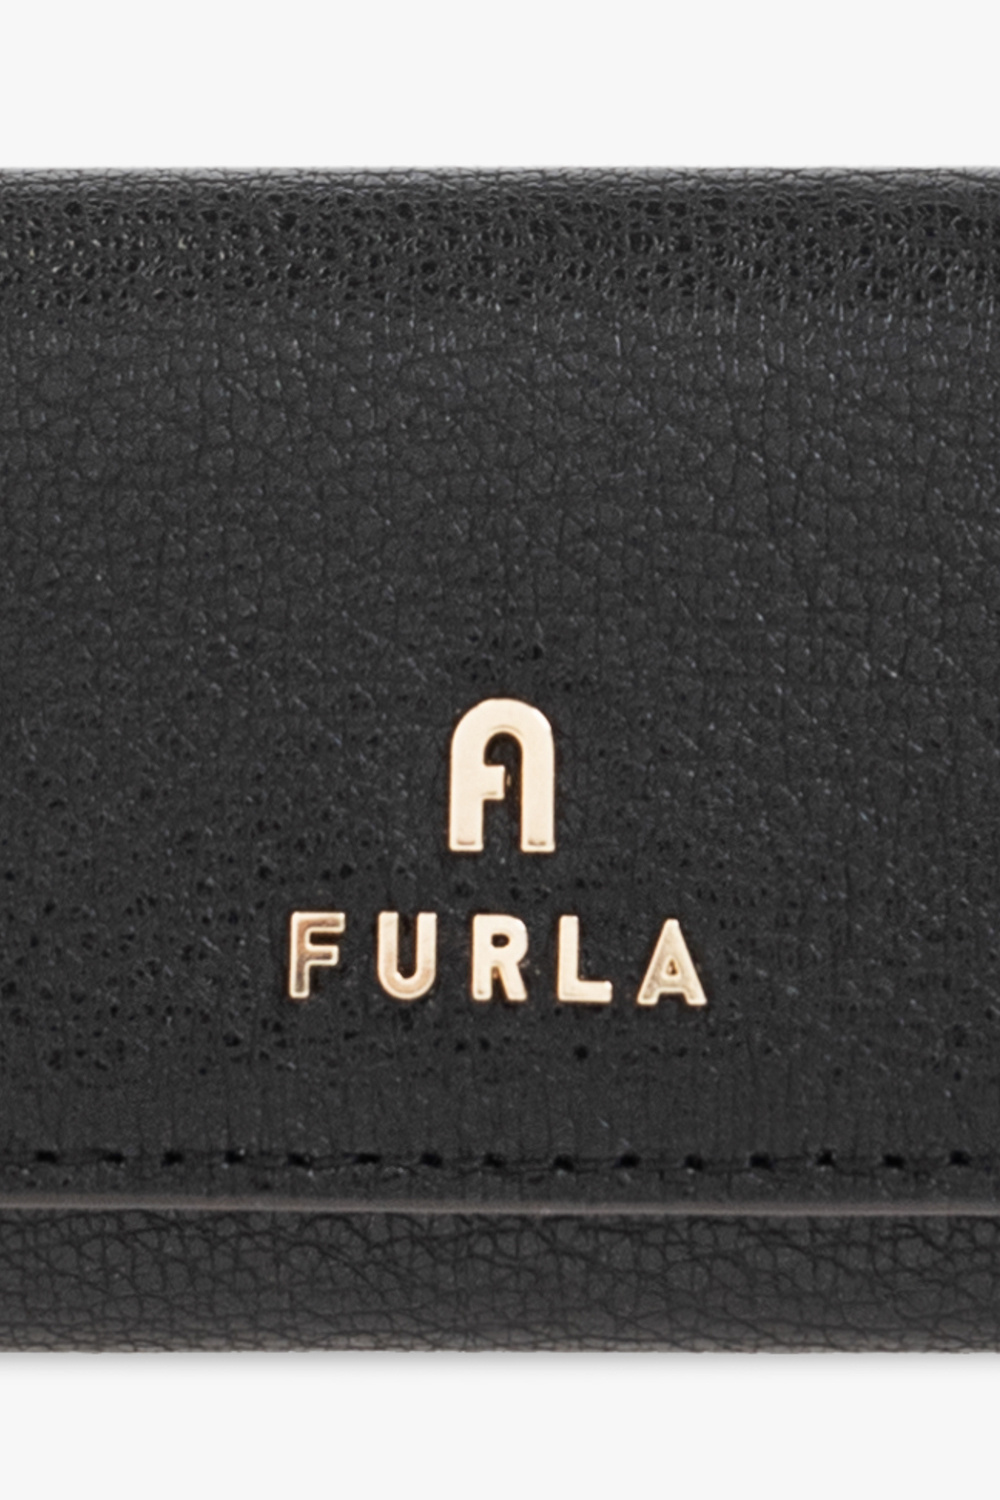 Furla A history of the brand